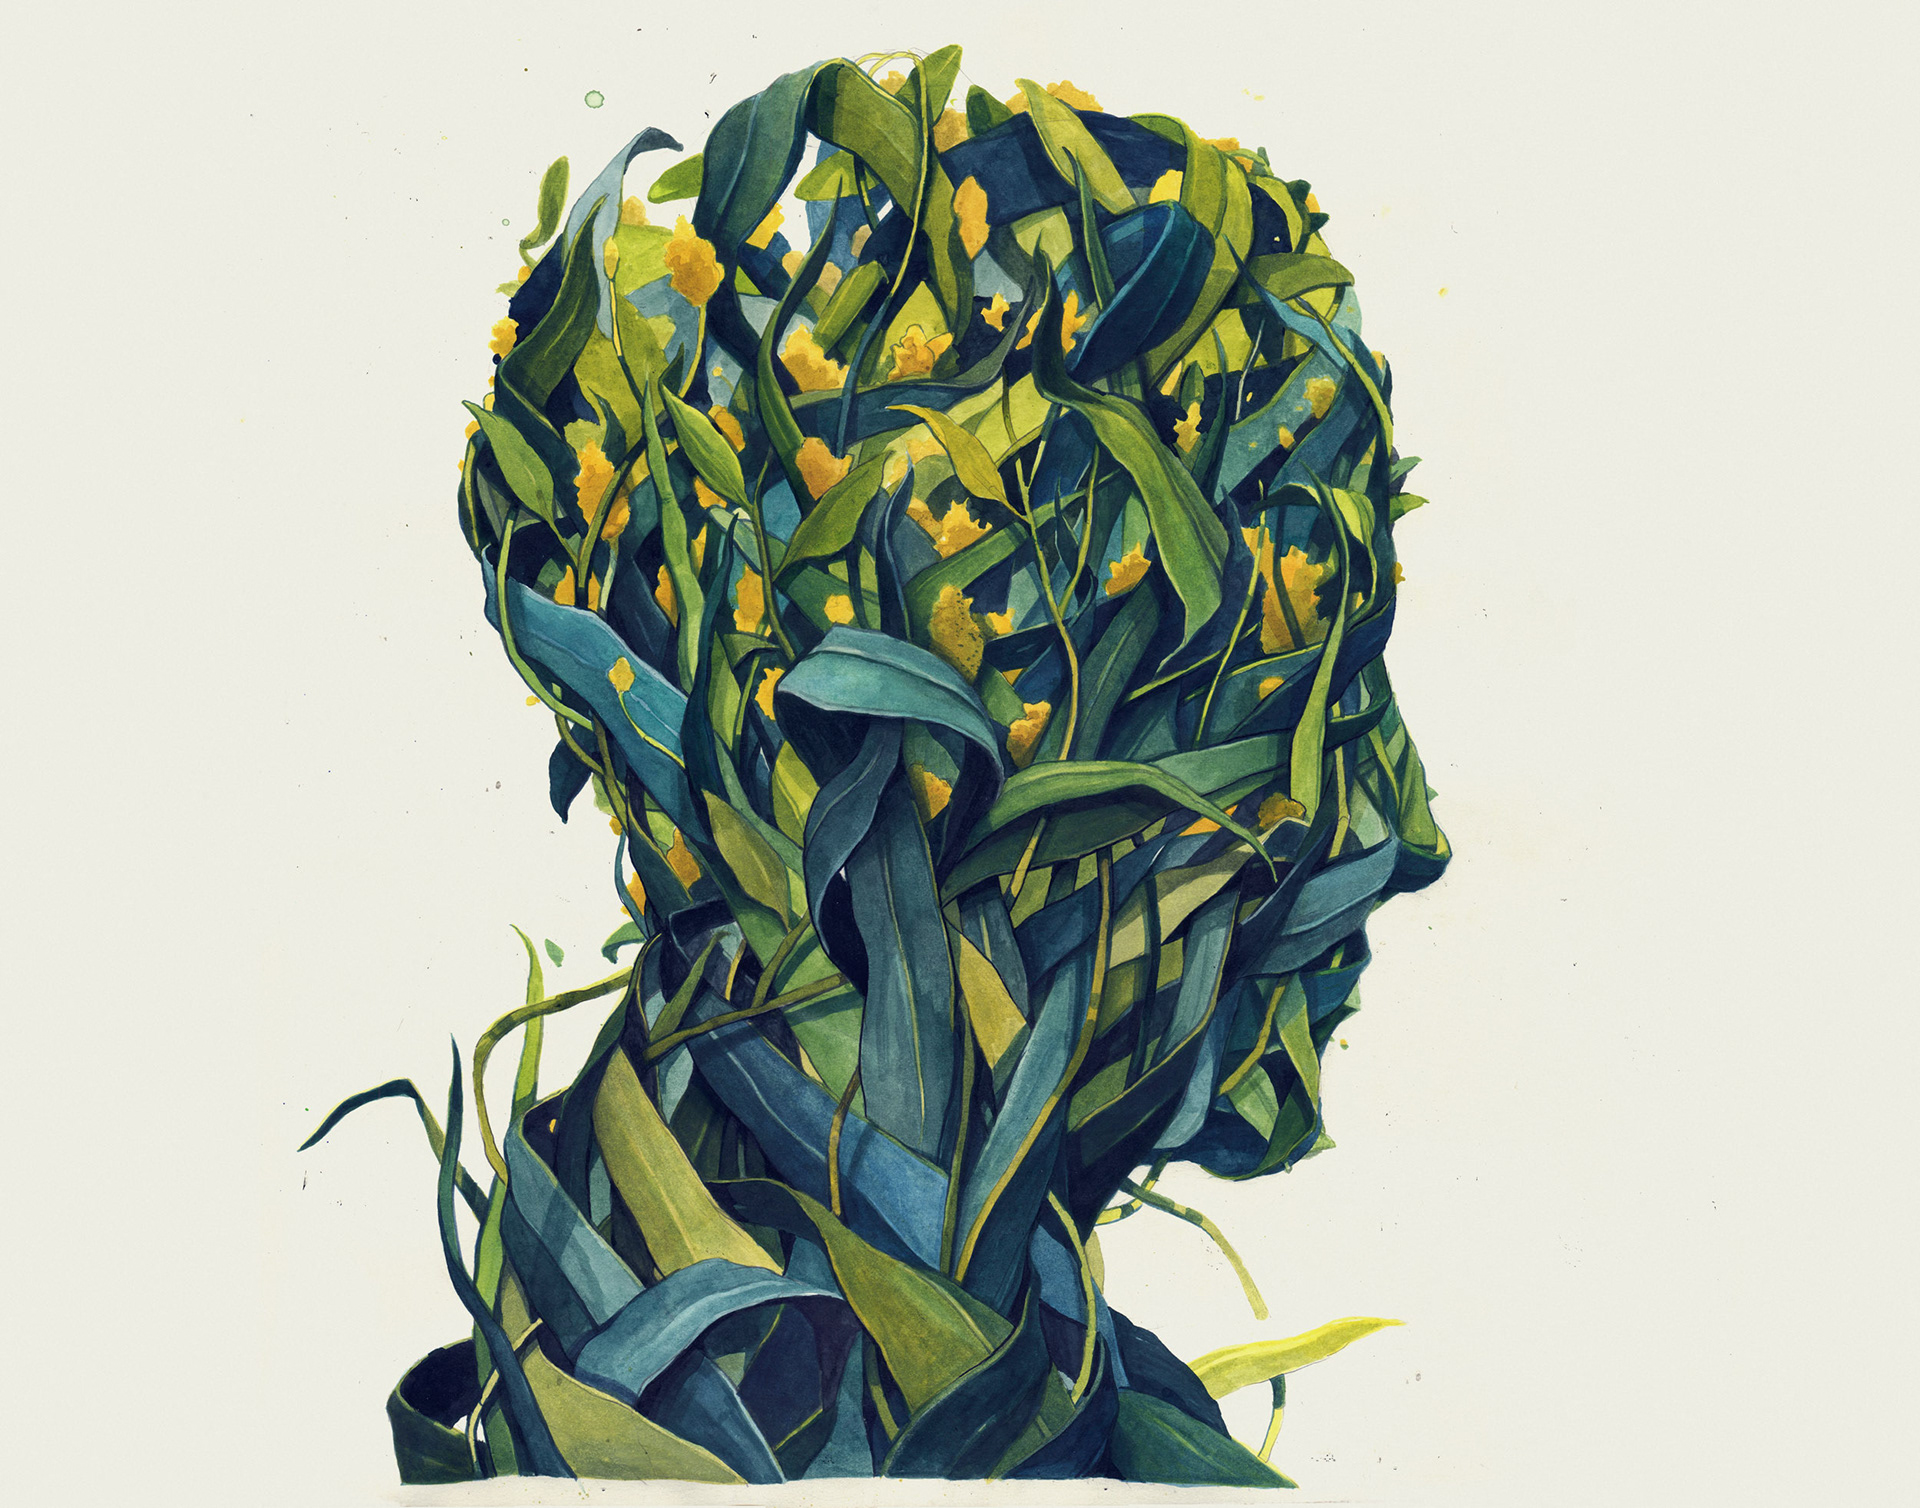 Mysterious Illustrations by Simon Prades